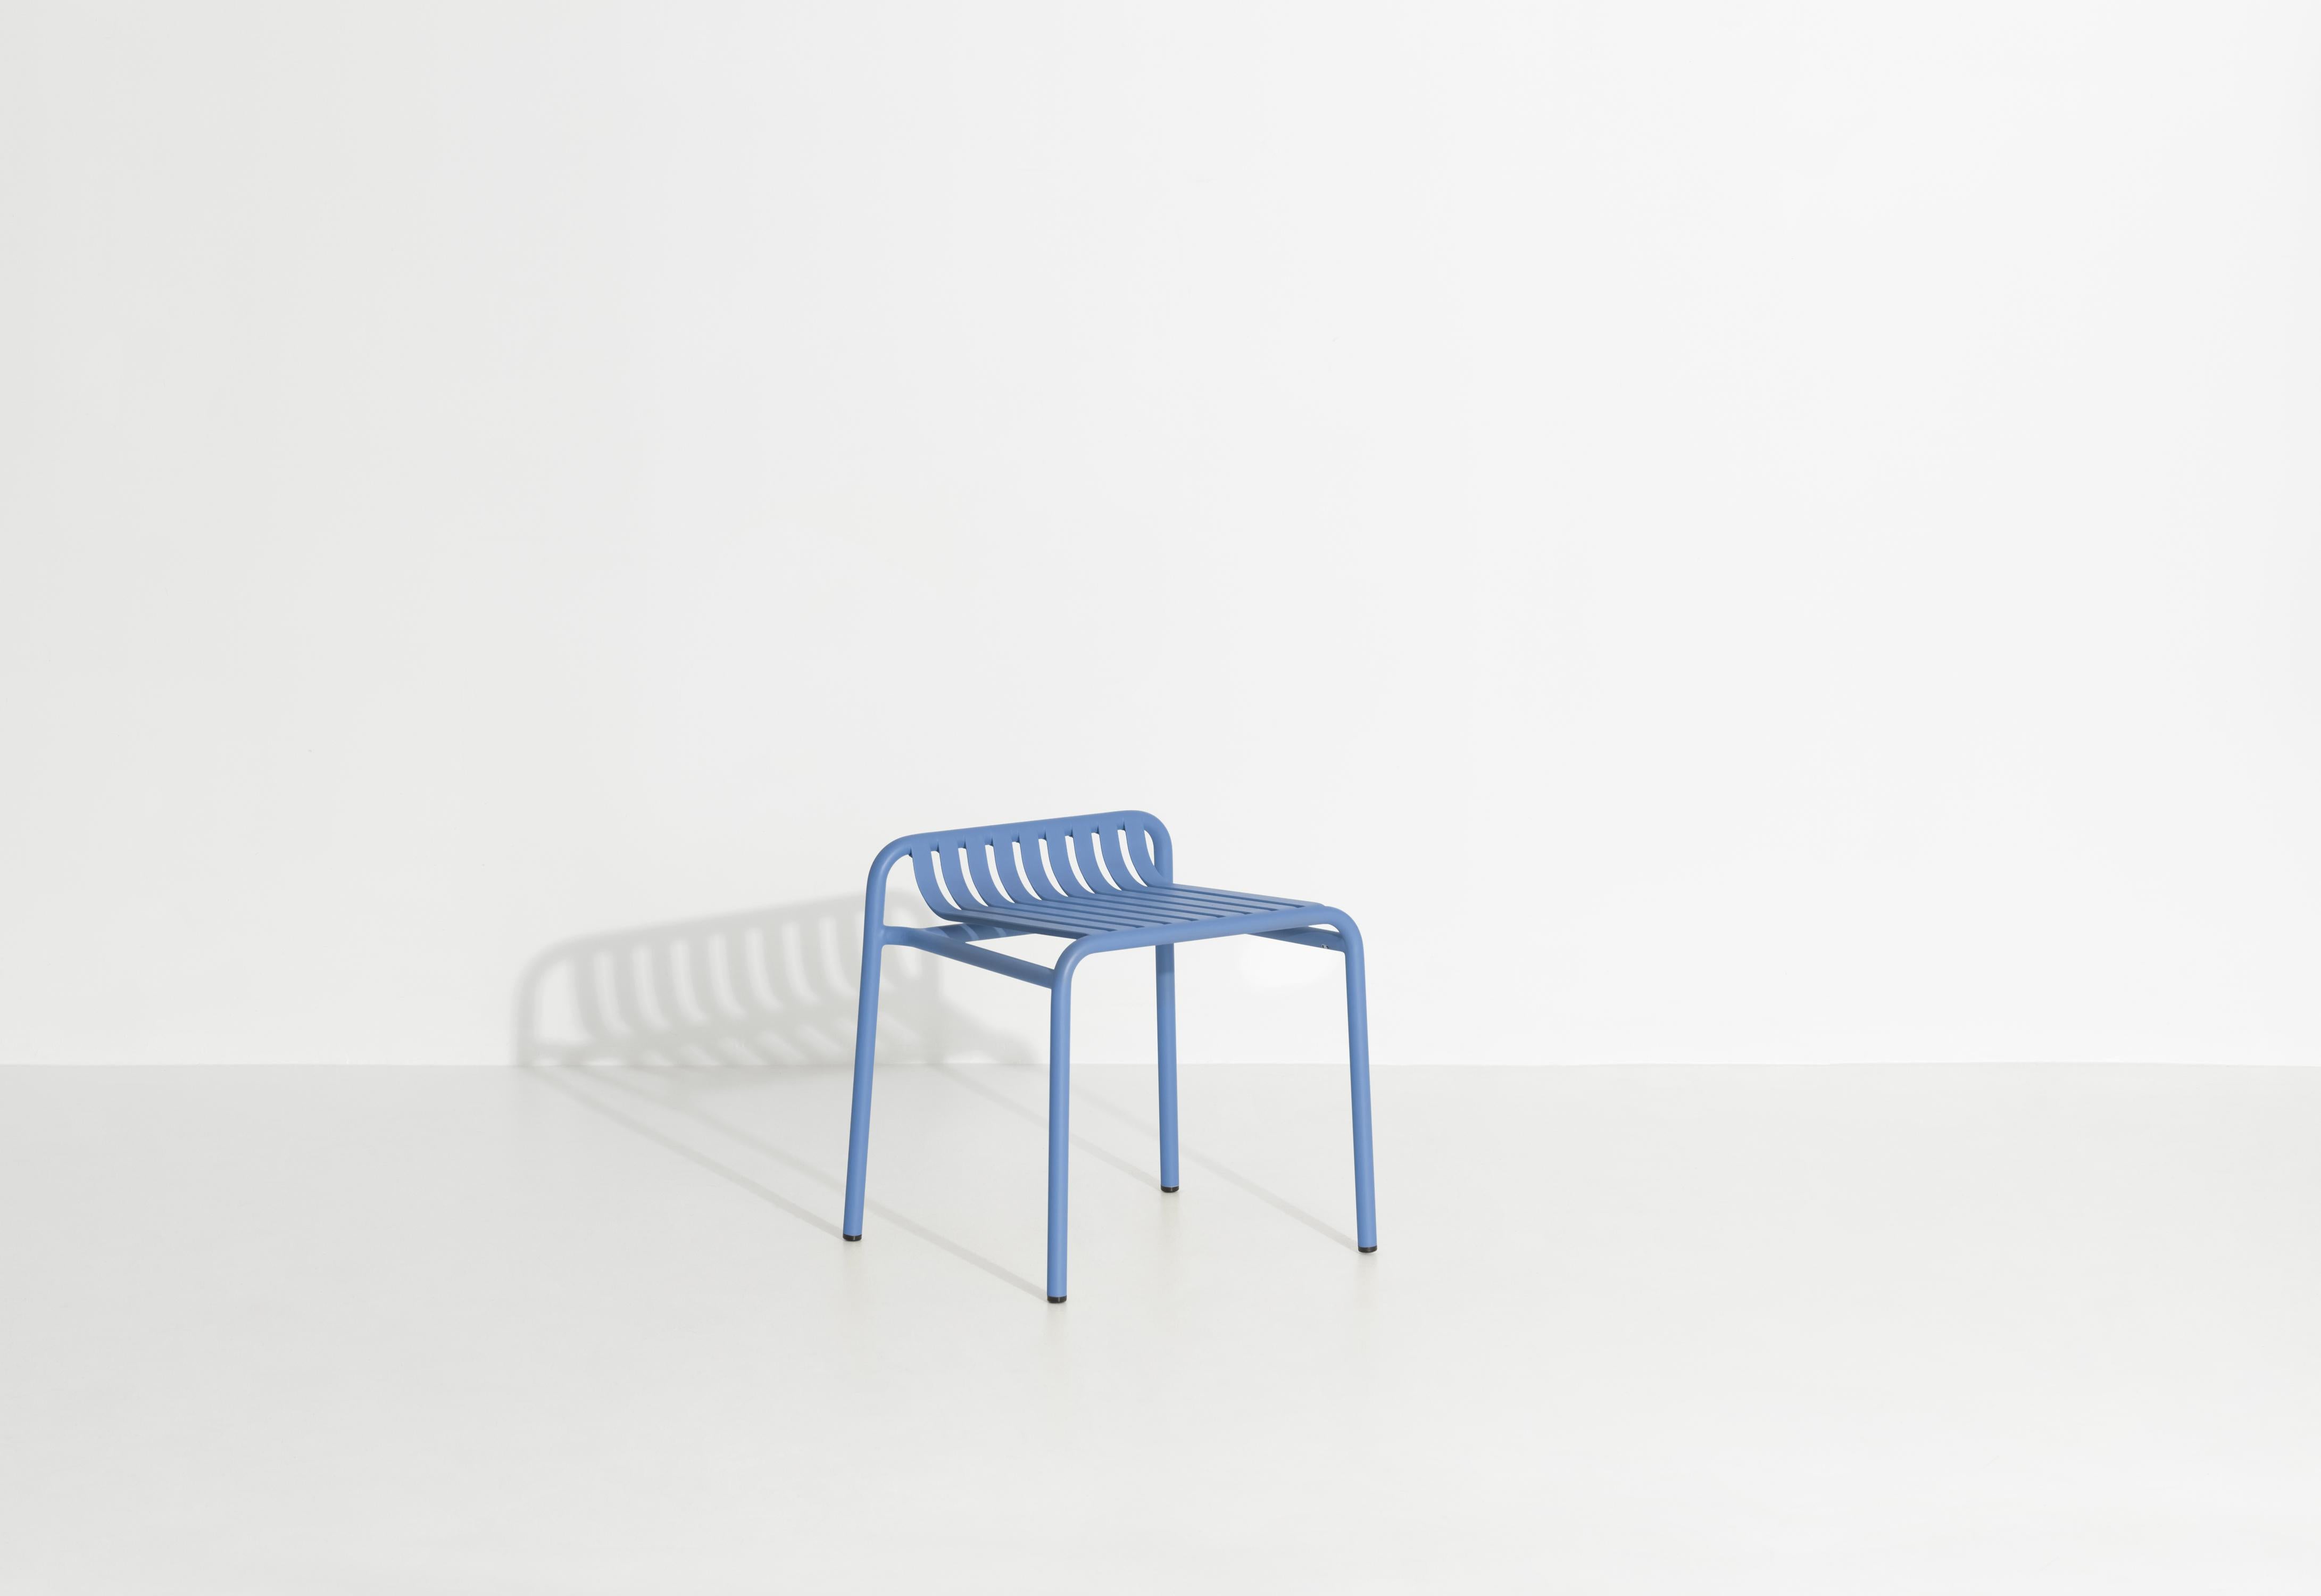 Petite Friture Week-End Stool in Azur Blue Aluminium by Studio BrichetZiegler, 2017

The week-end collection is a full range of outdoor furniture, in aluminium grained epoxy paint, matt finish, that includes 18 functions and 8 colours for the